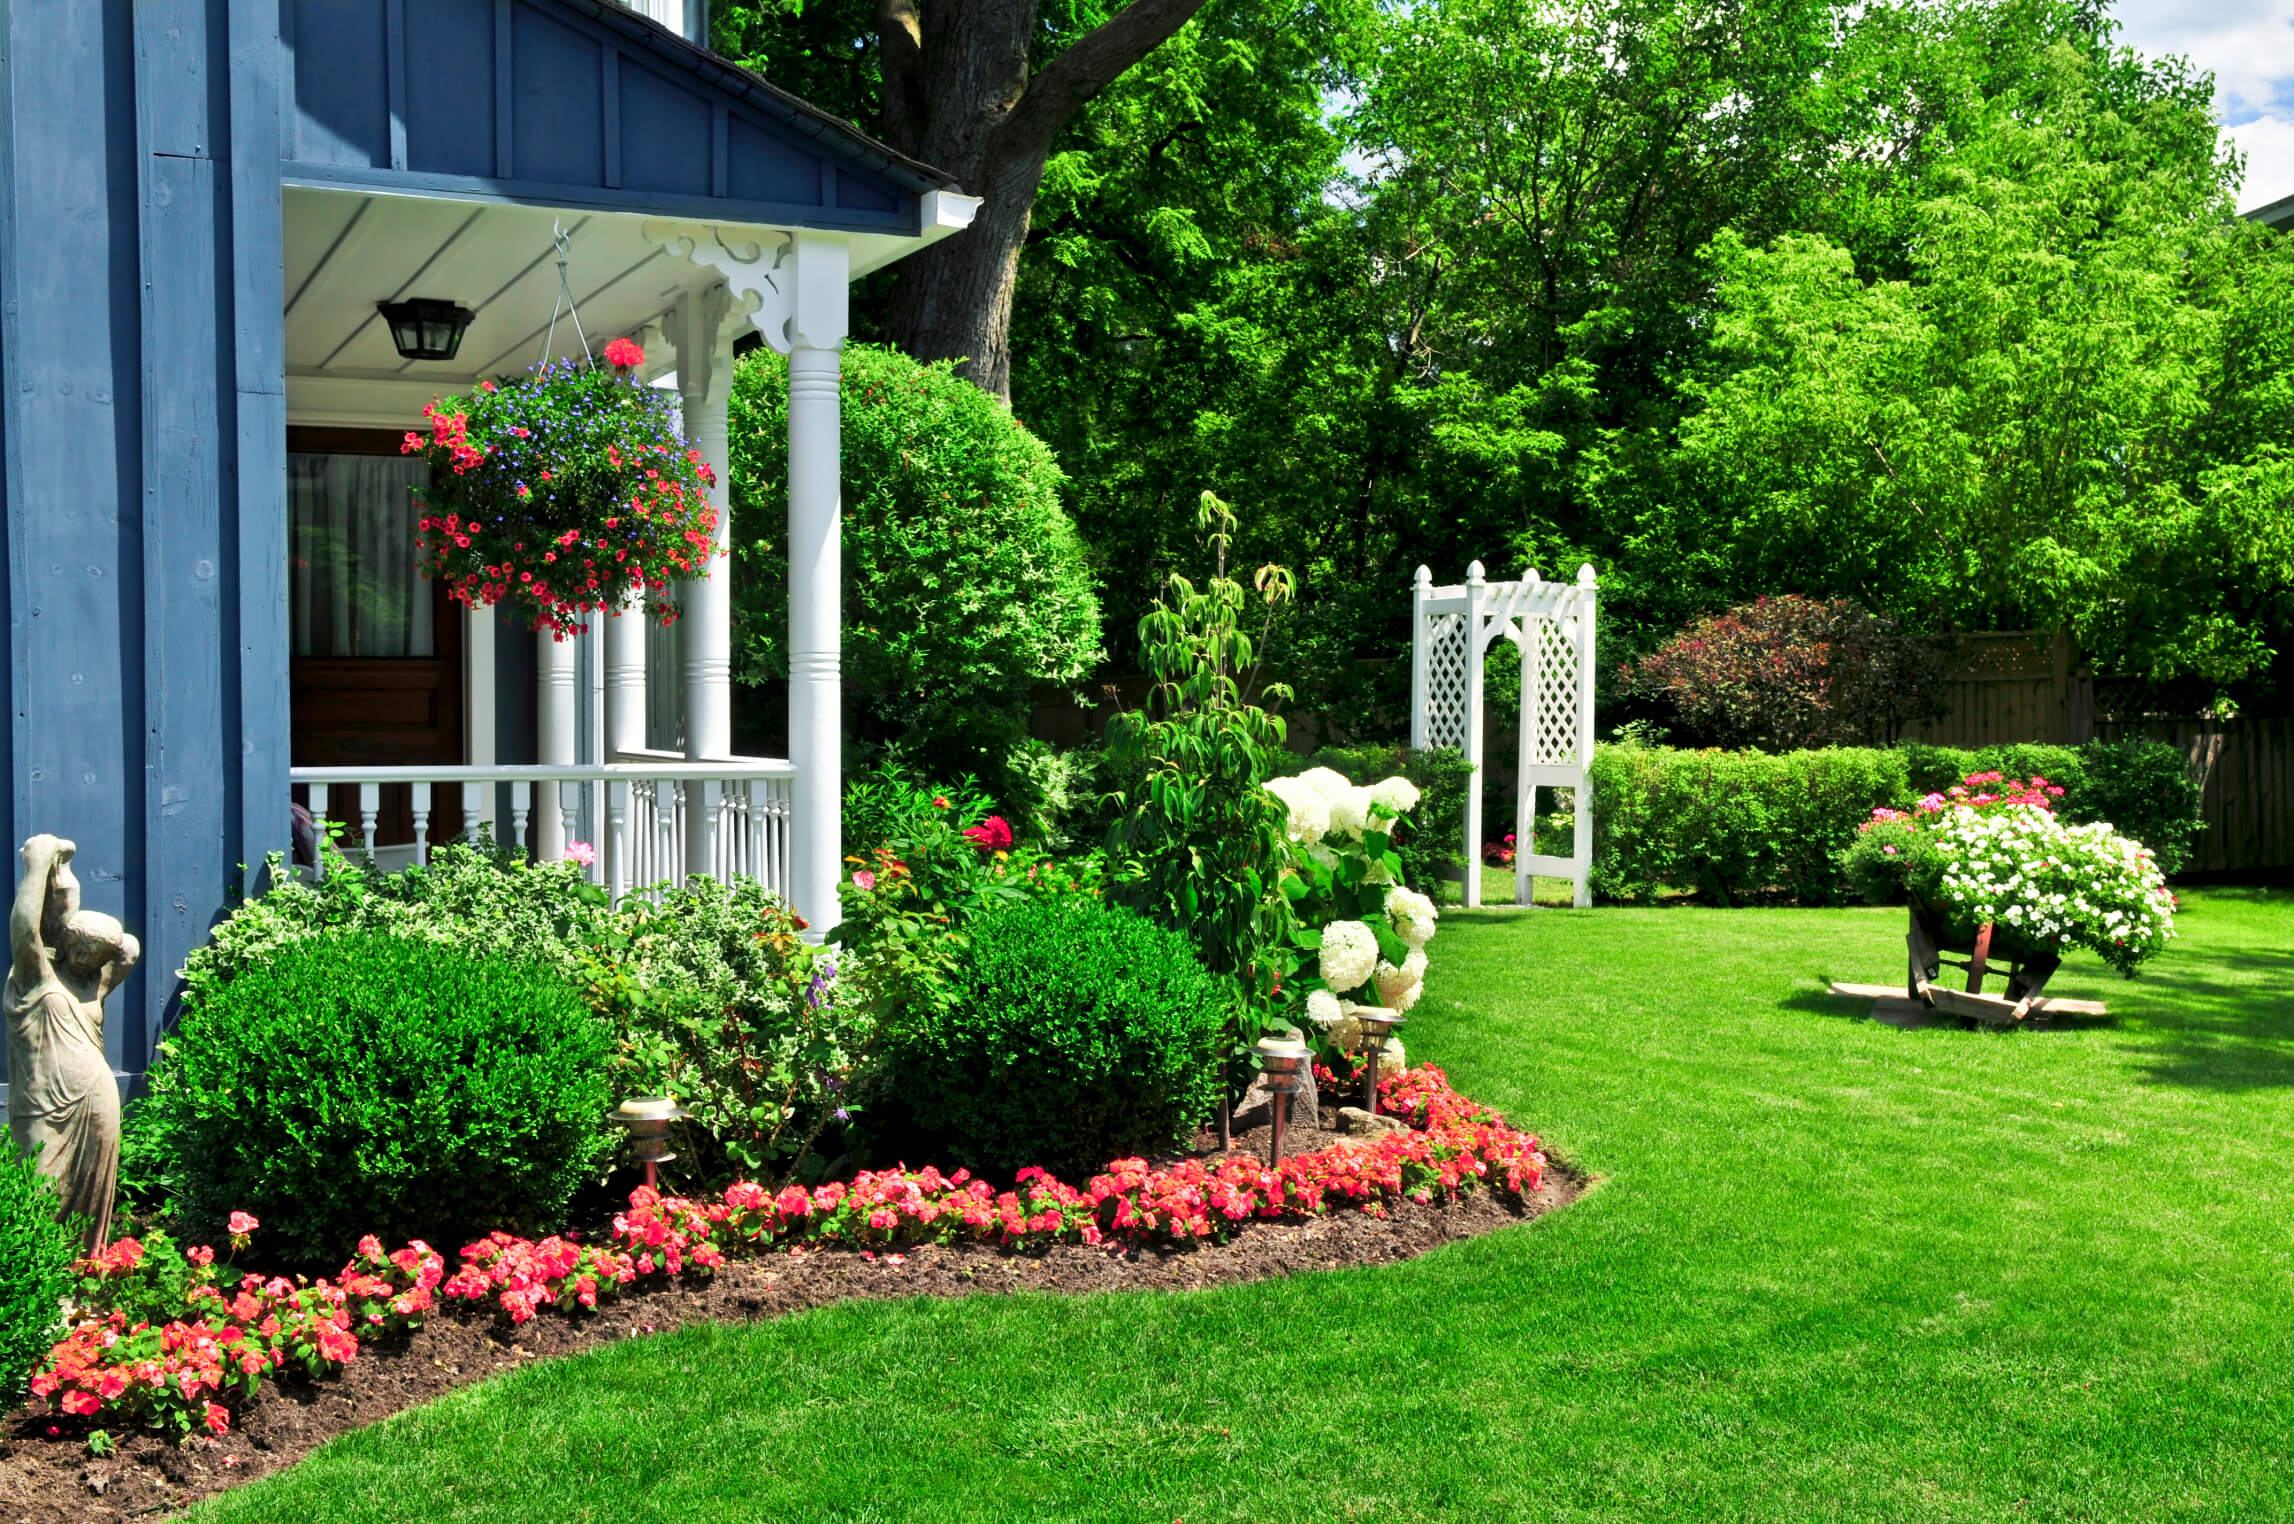 How to Remodel a Garden